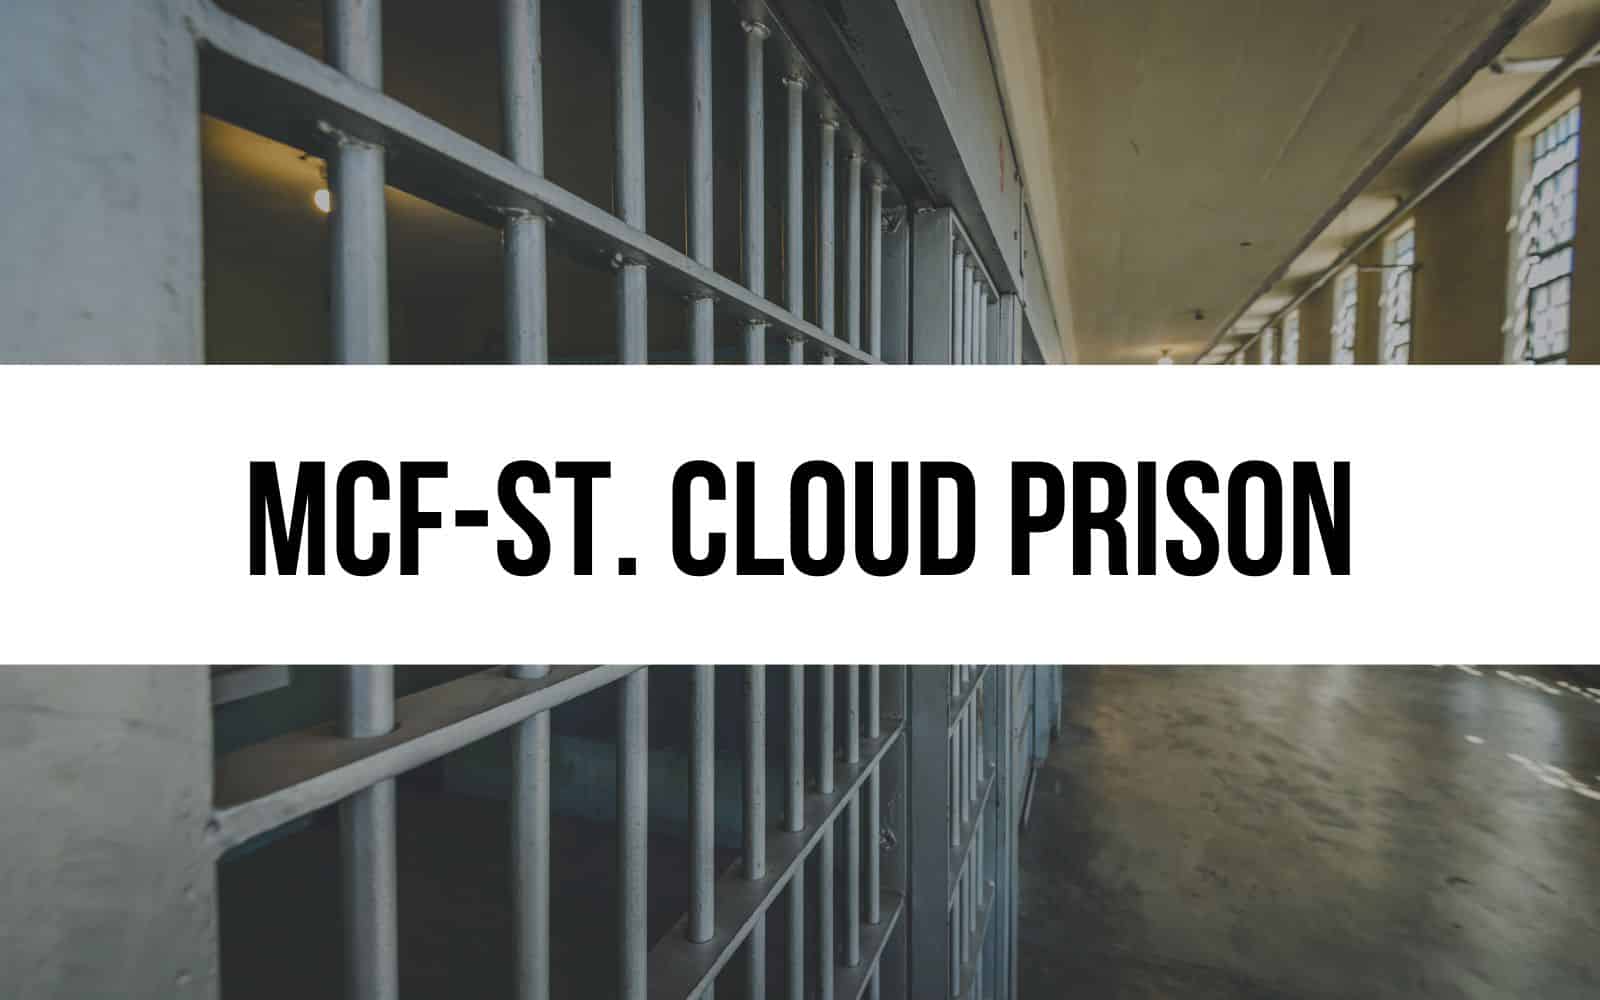 St. Cloud Prison: Security and Rehabilitation in Minnesota